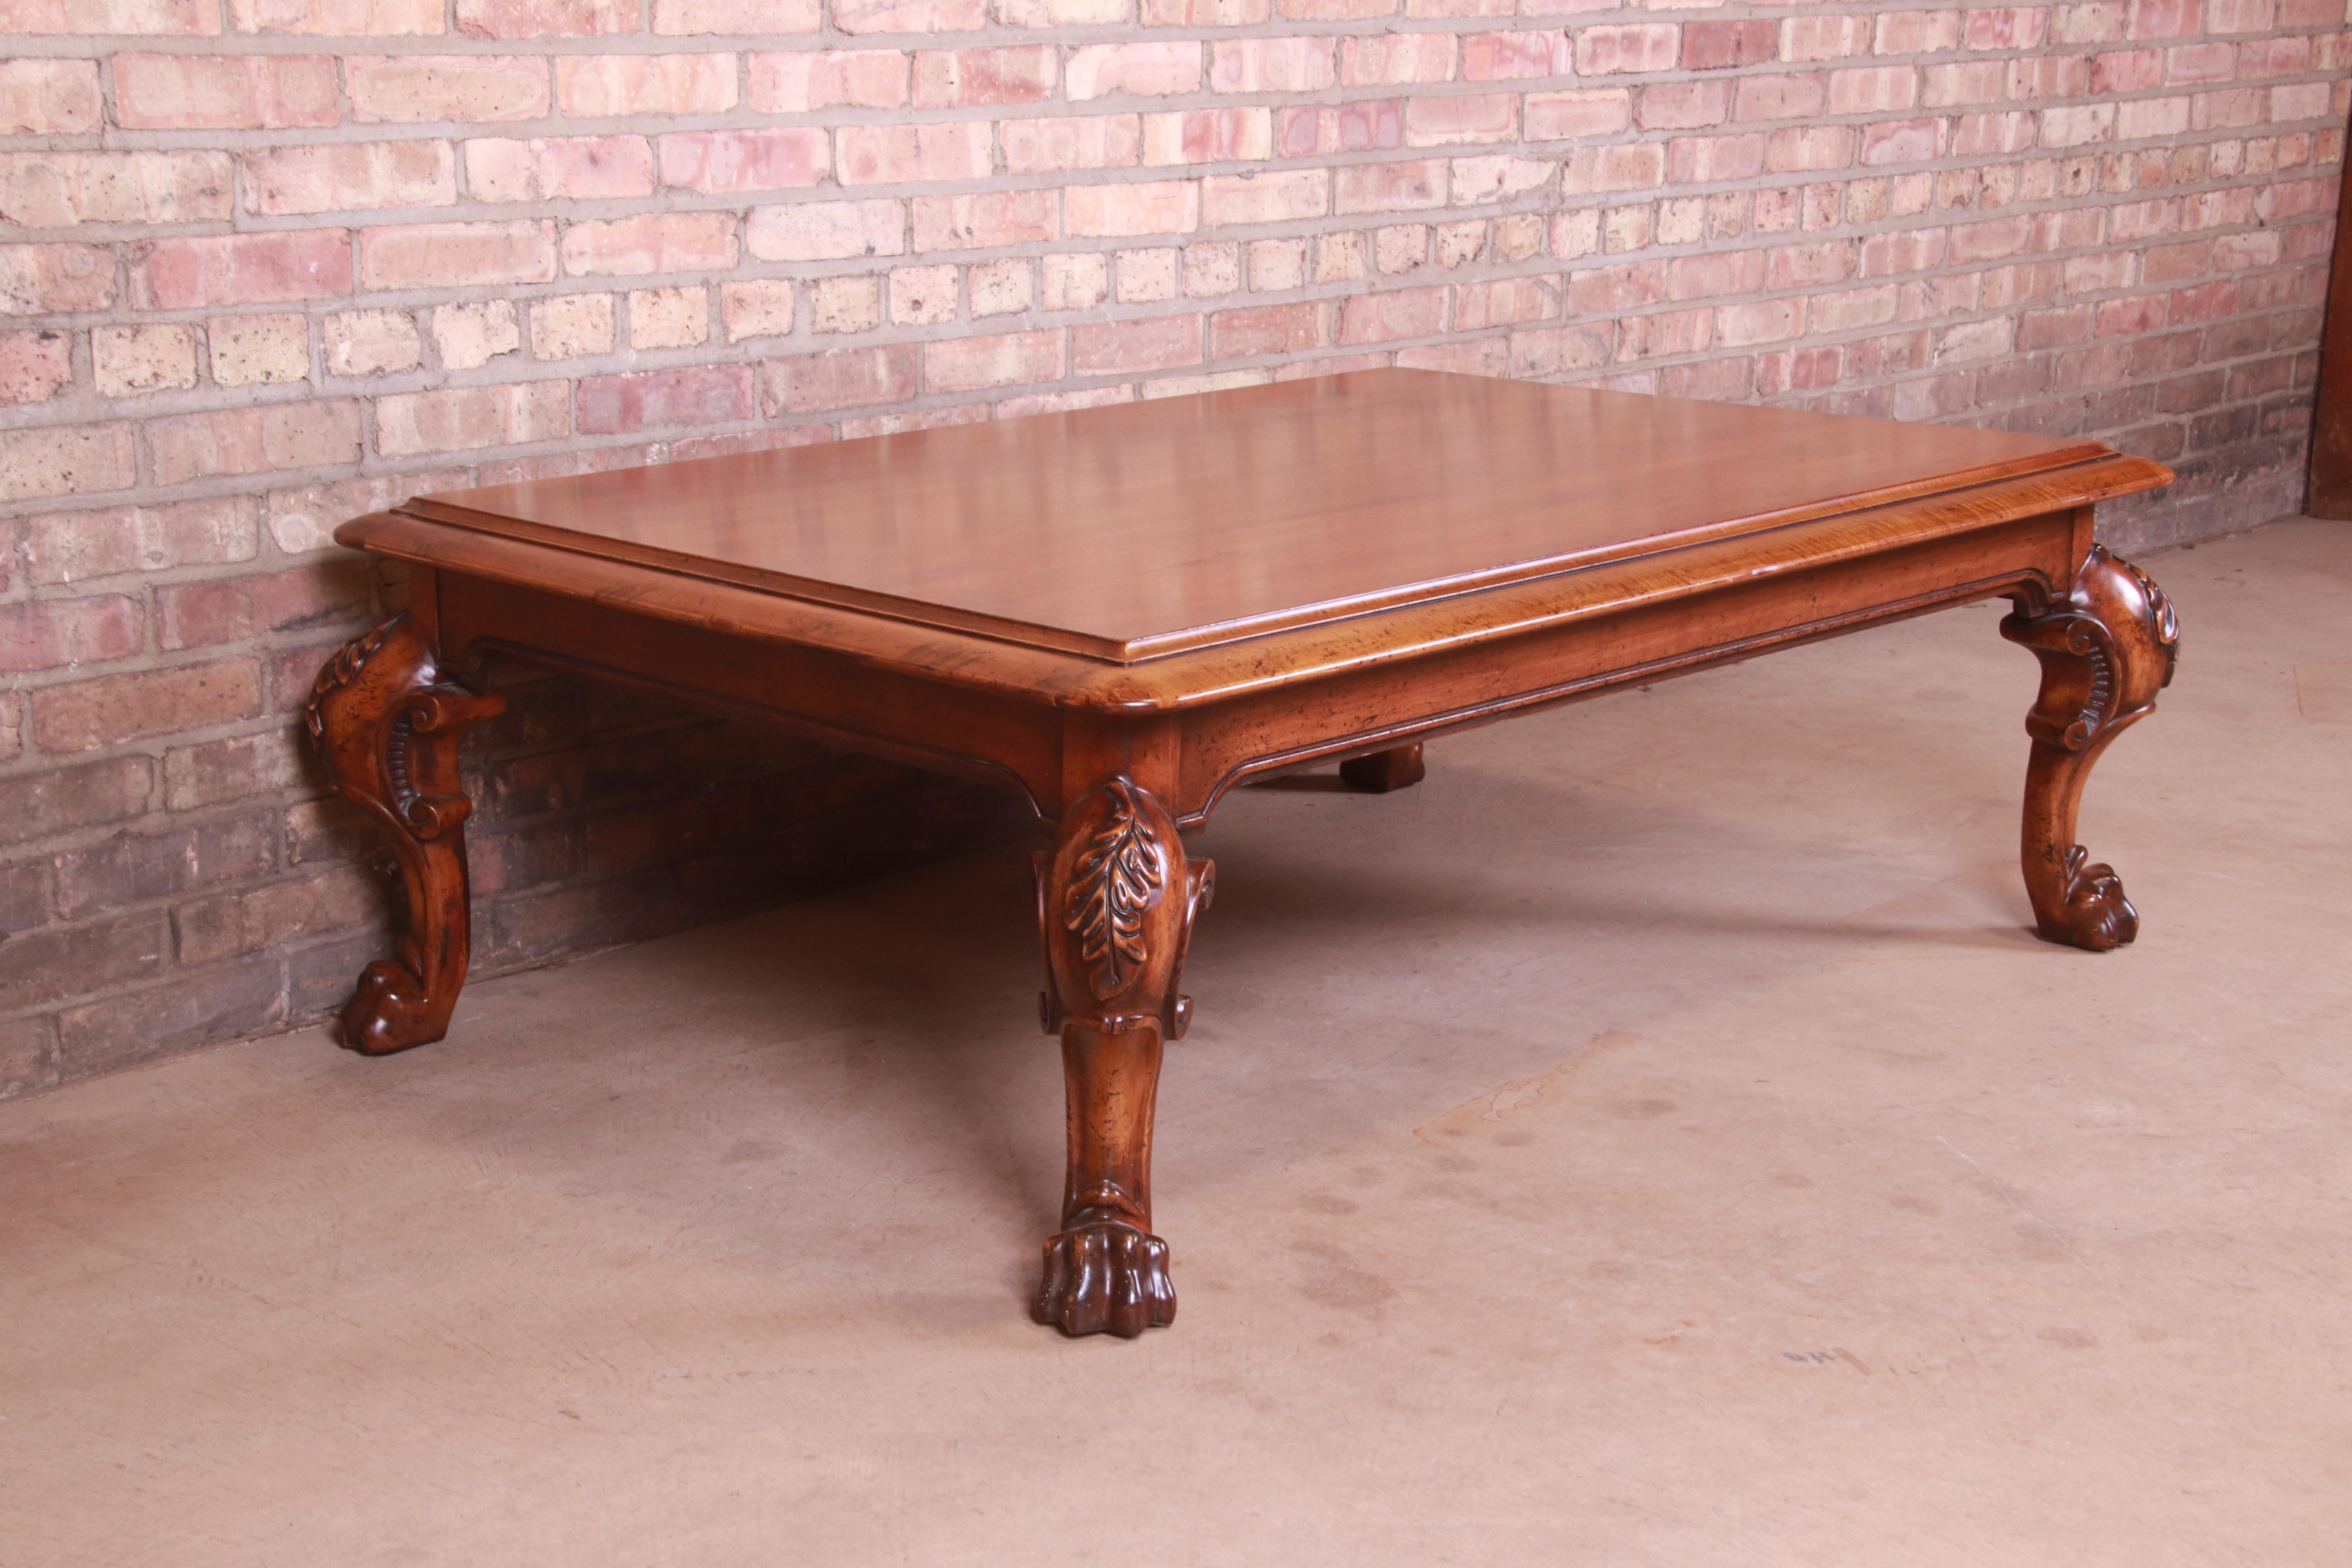 20th Century Ralph Lauren Georgian Carved Walnut Coffee or Cocktail Table